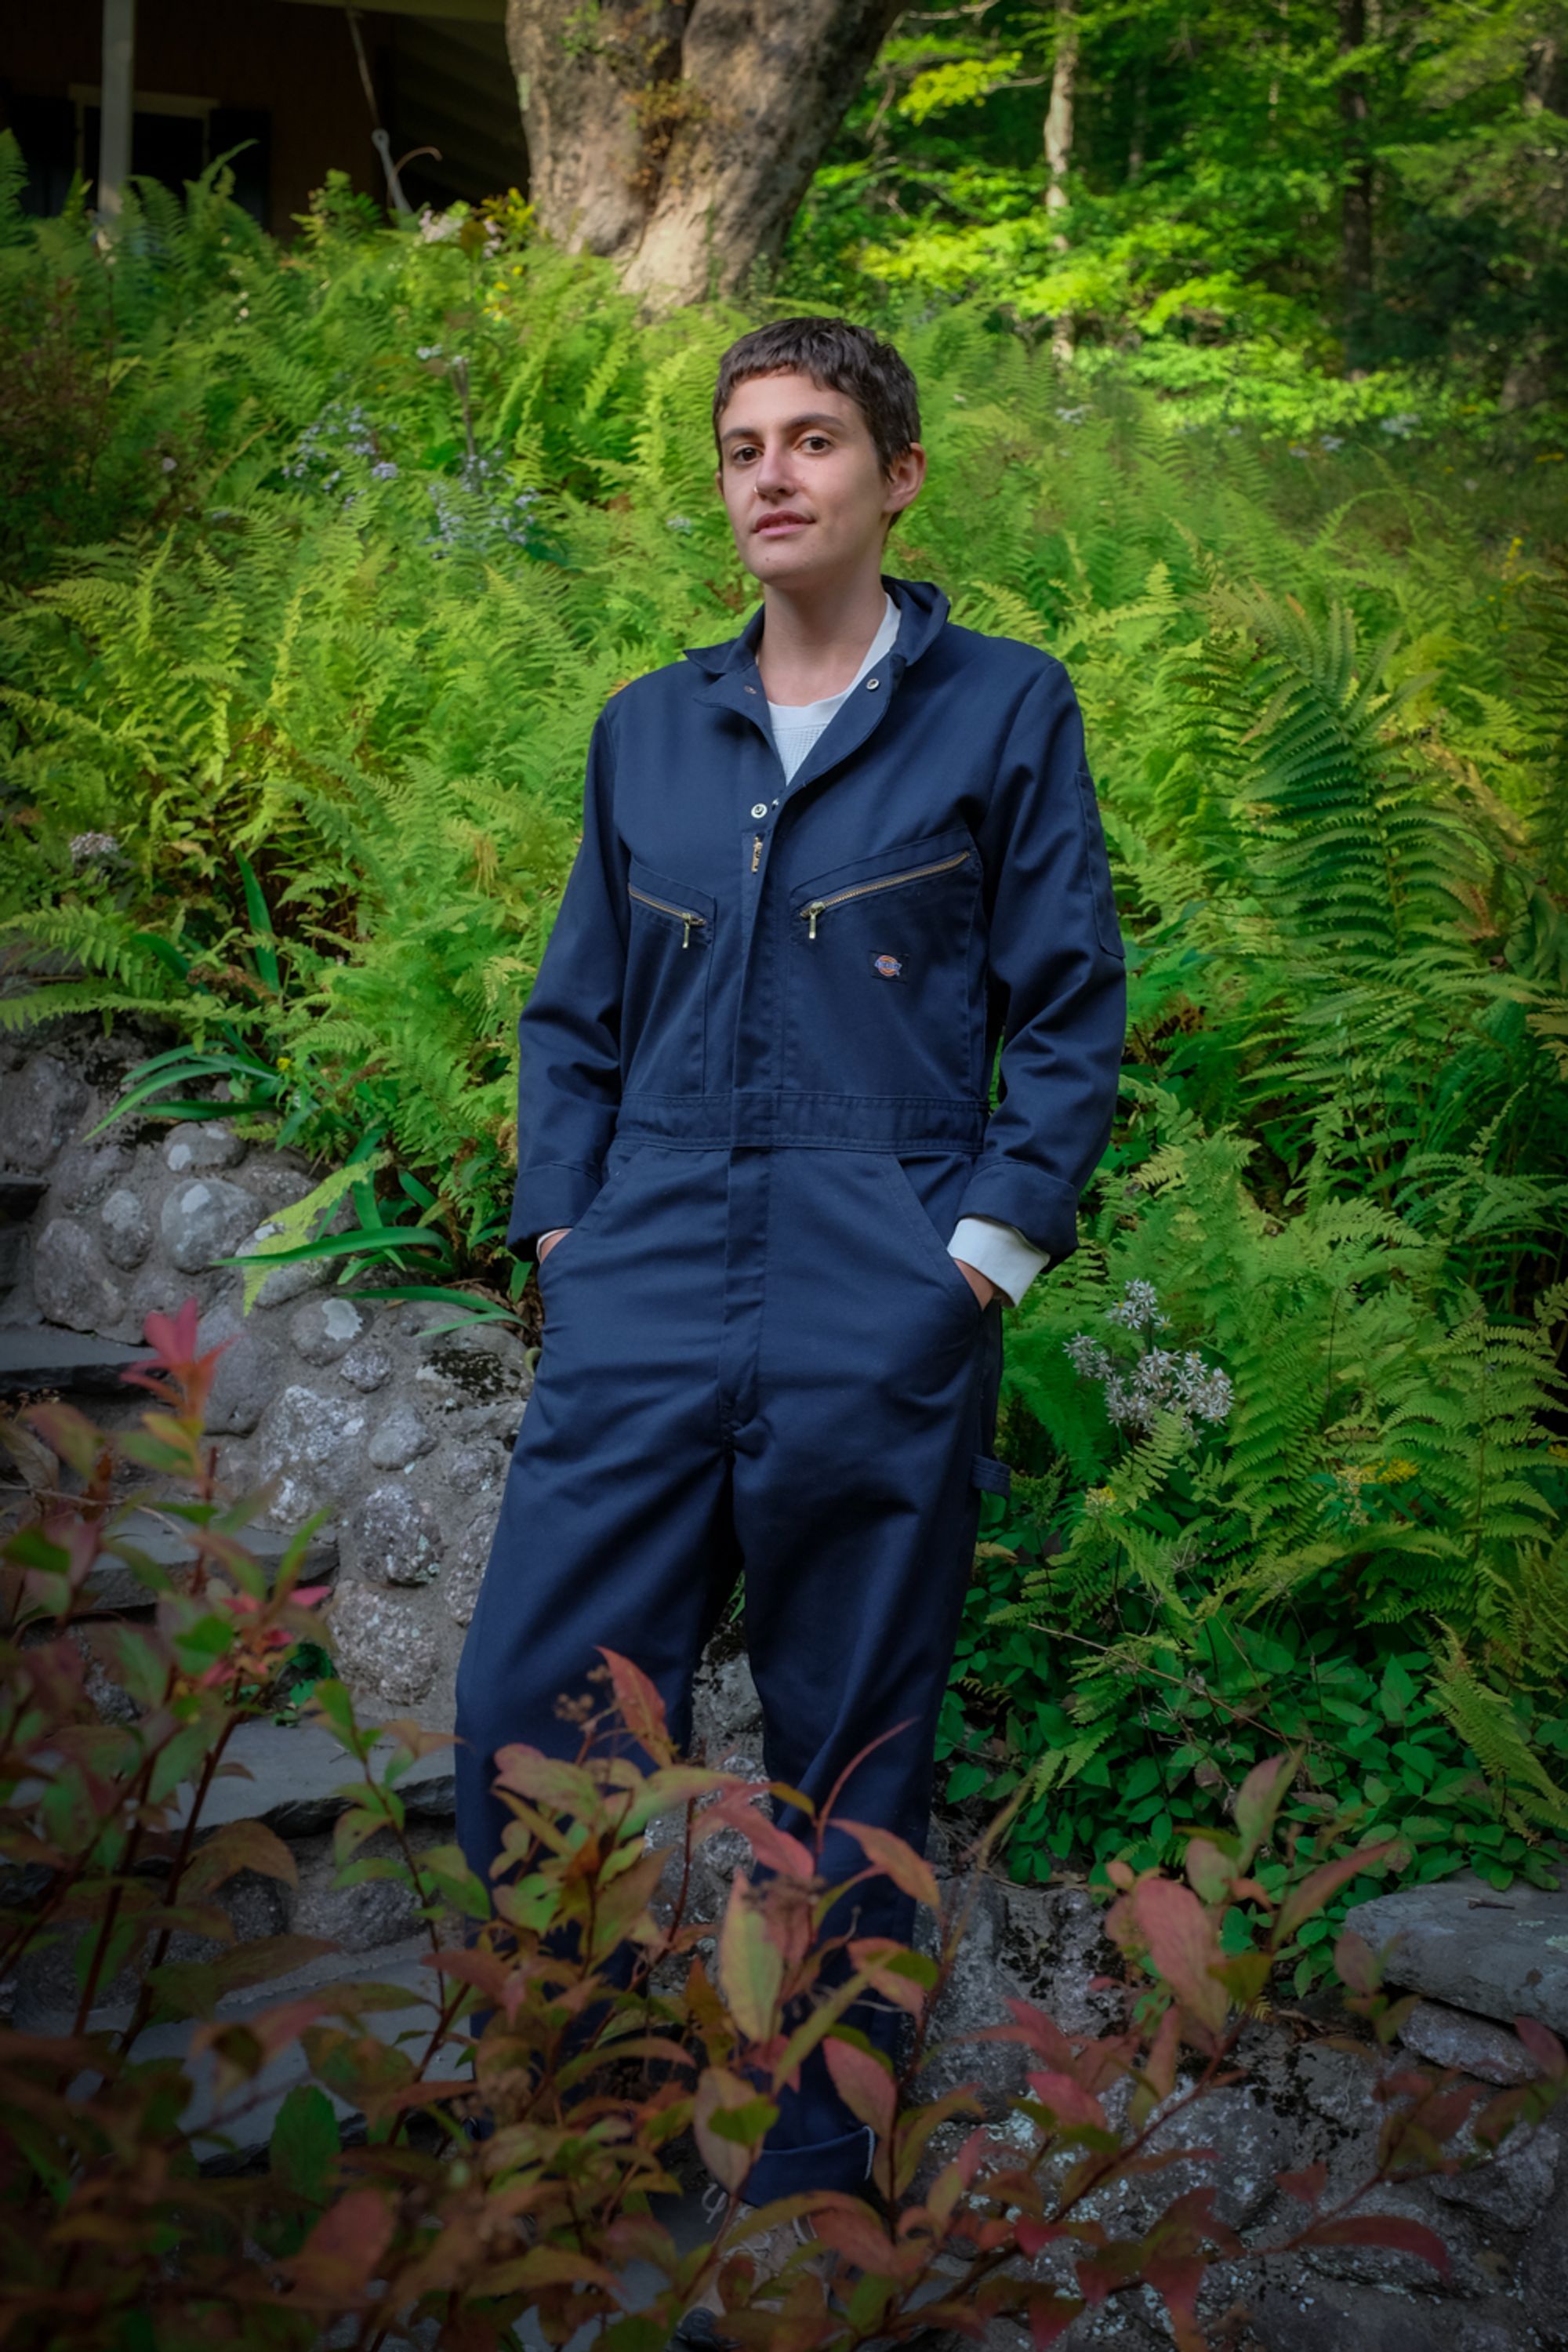 A person wearing a navy dickies jumpsuit against a lush landscape of greenery.